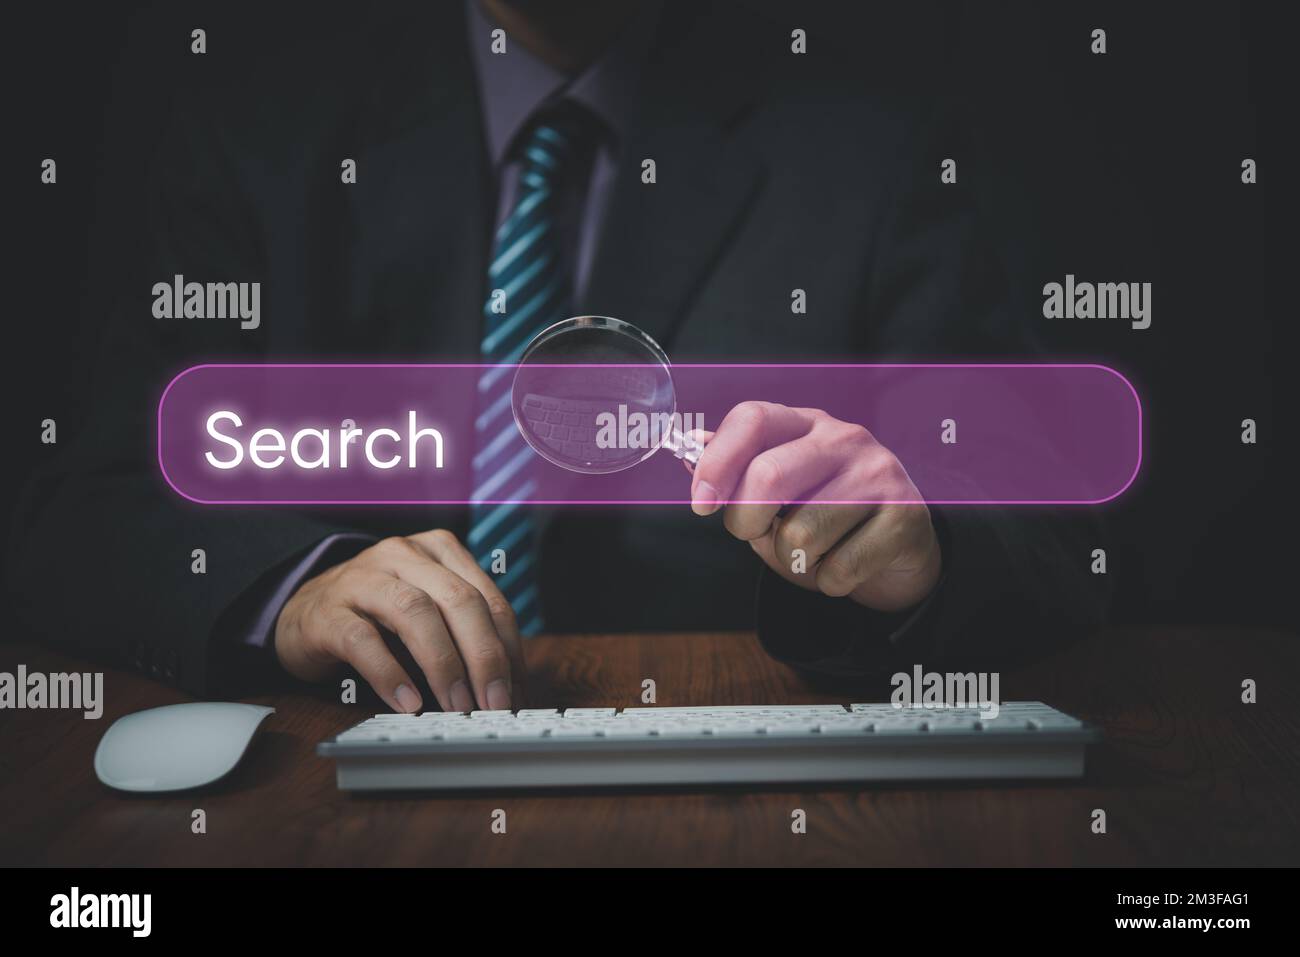 Man use computer to Searching for information.Search On Virtual Screen Data Search Technology Search Engine Optimization.Internet website online conce Stock Photo